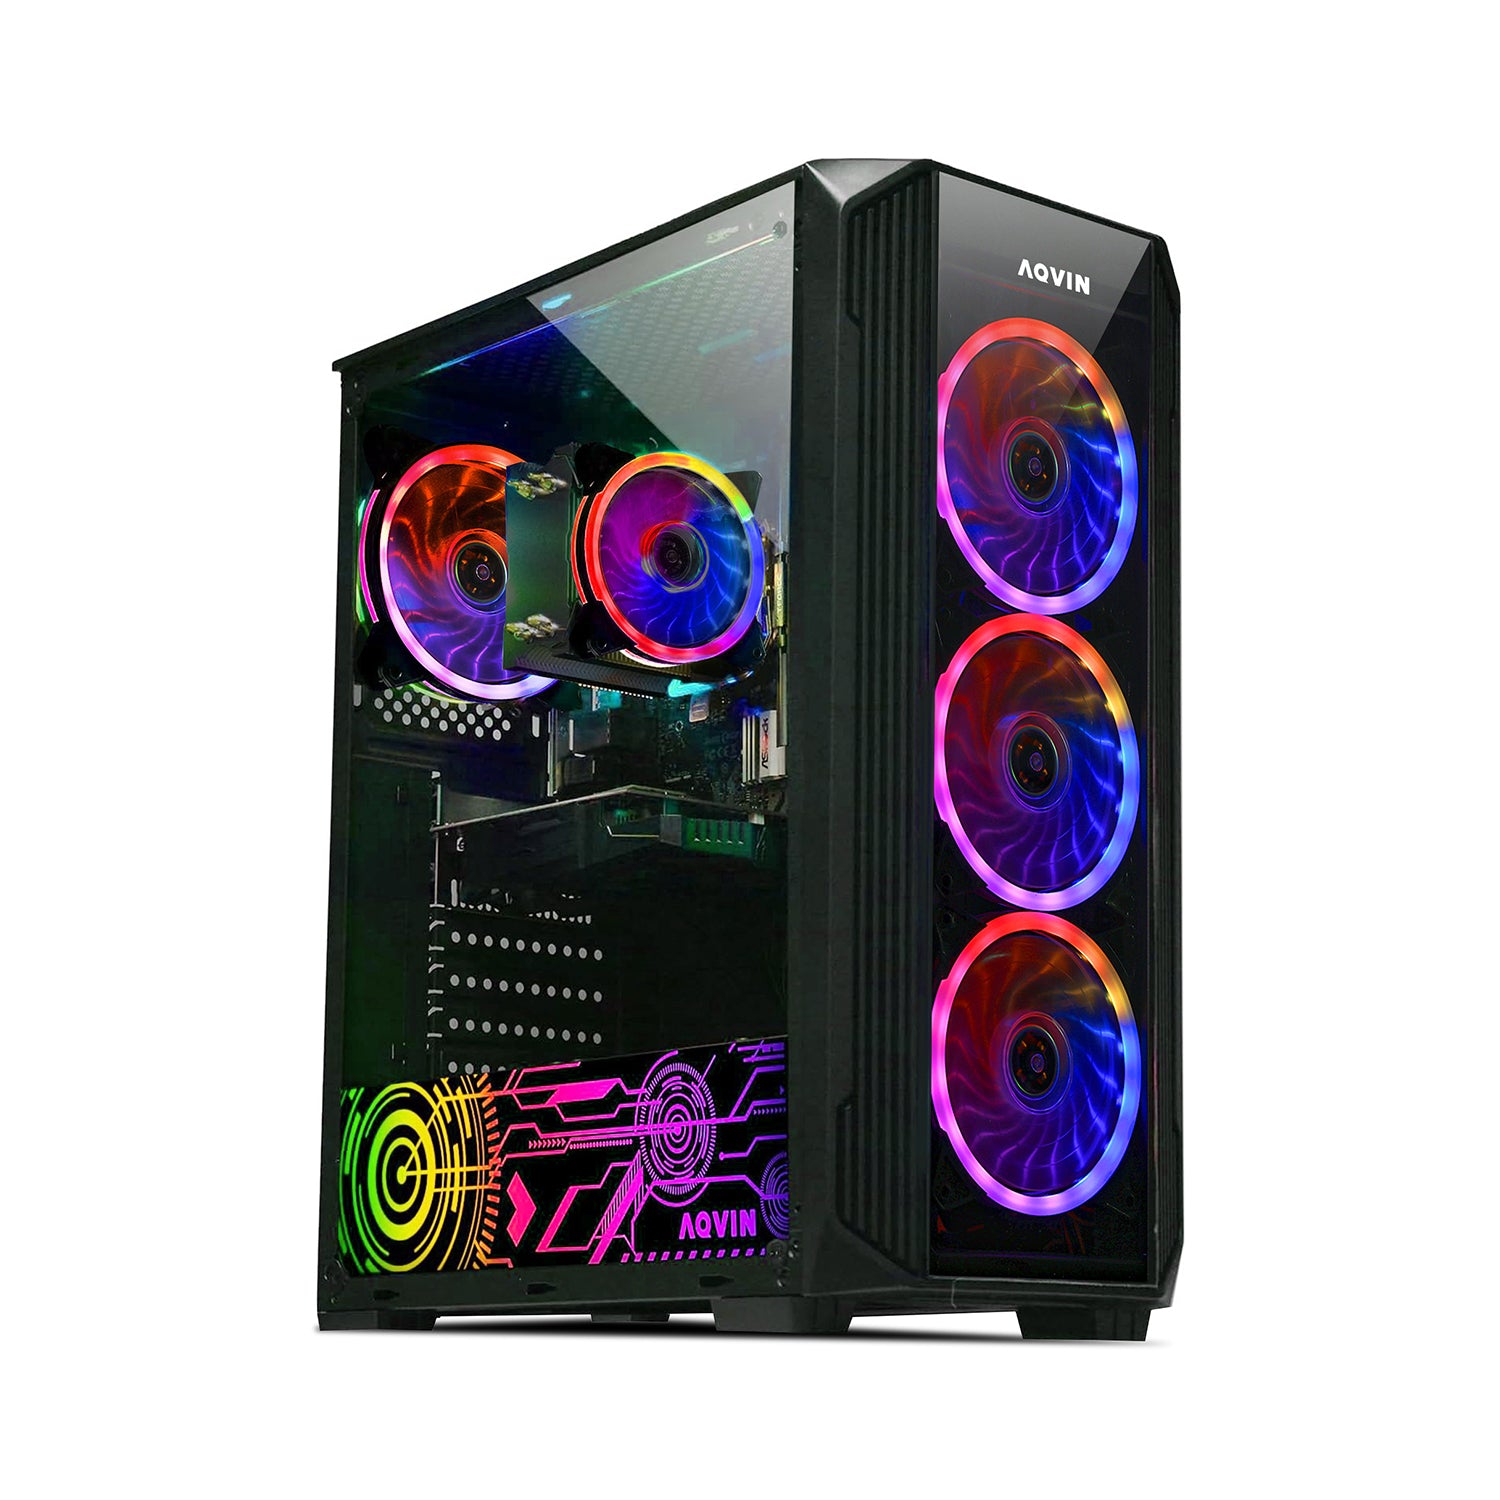 AQVIN Z-Force Gaming Desktop Tower PC/ 24 and 27 inch Curved Screen/ Intel Core i7 up to 4.00 GHz Processor/ RX 580, GTX 1660s, RTX 3050, 3060/ 32GB DDR4 RAM/ 512GB - 2TB SSD/ WIFI/ Windows 10 Pro - Refurbished